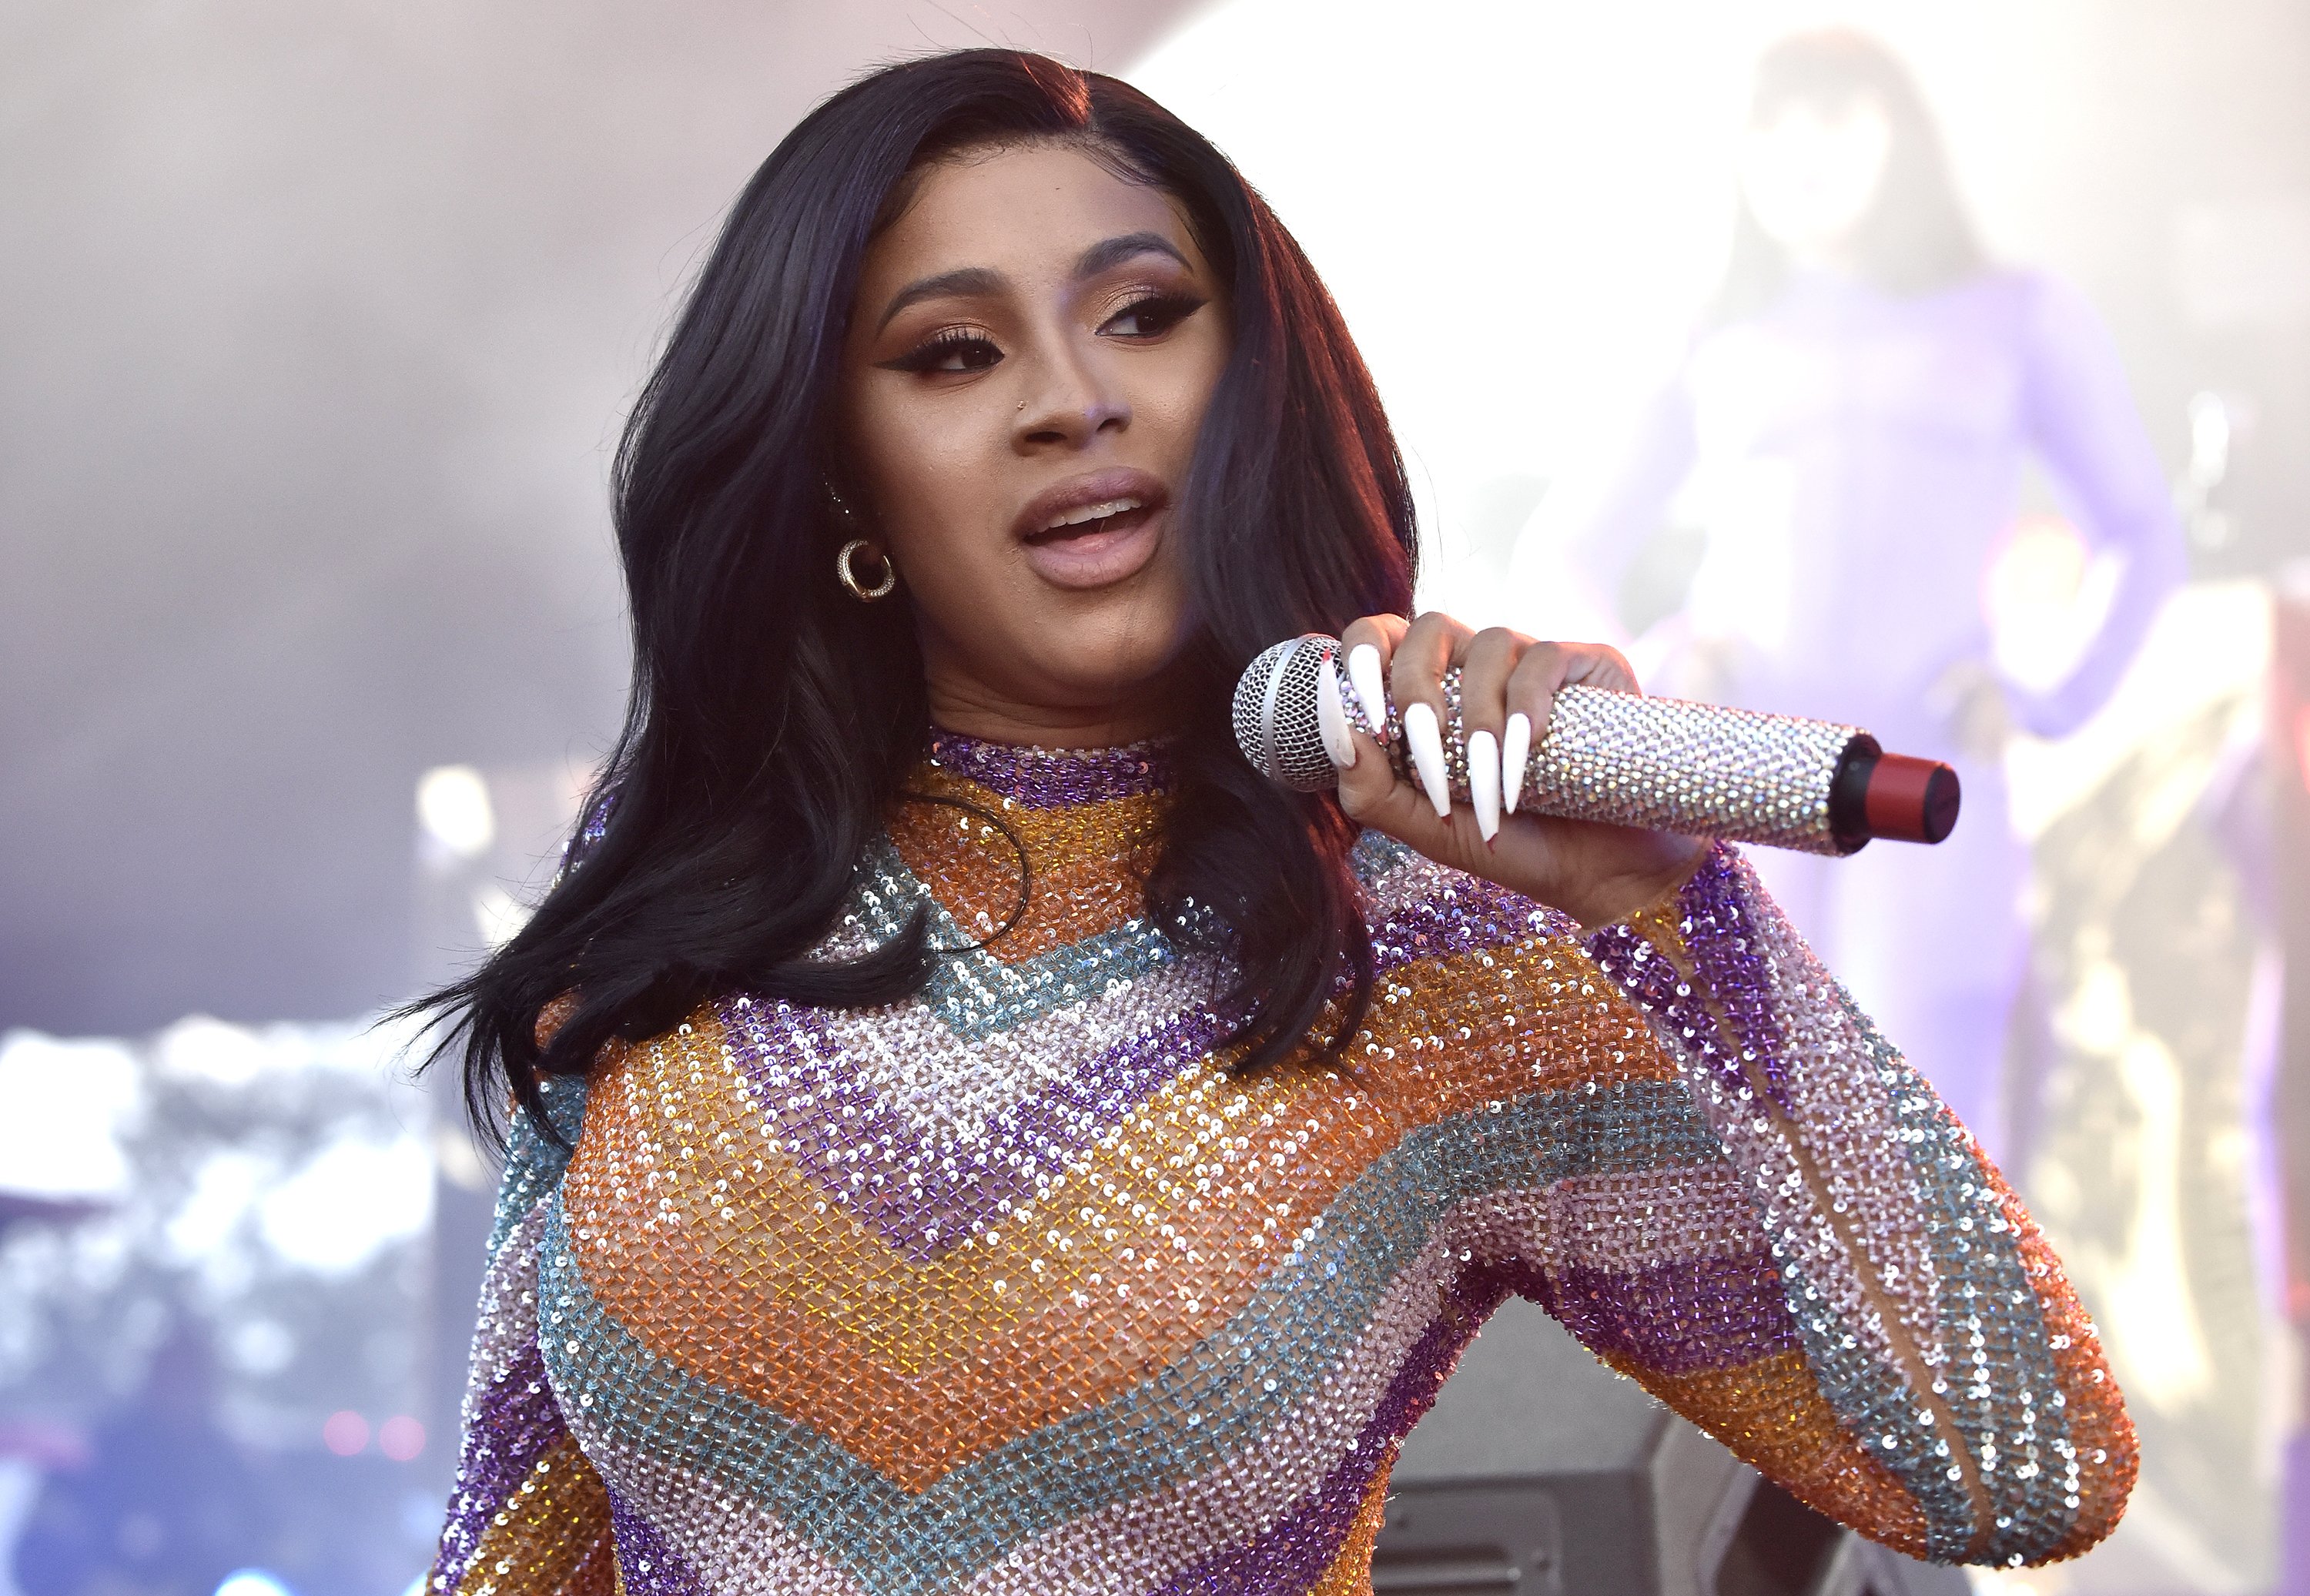 Cardi B performs at the 2019 Bonnaroo Music & Arts Festival on June 16, 2019 in Manchester, Tennessee.|Source: Getty Images